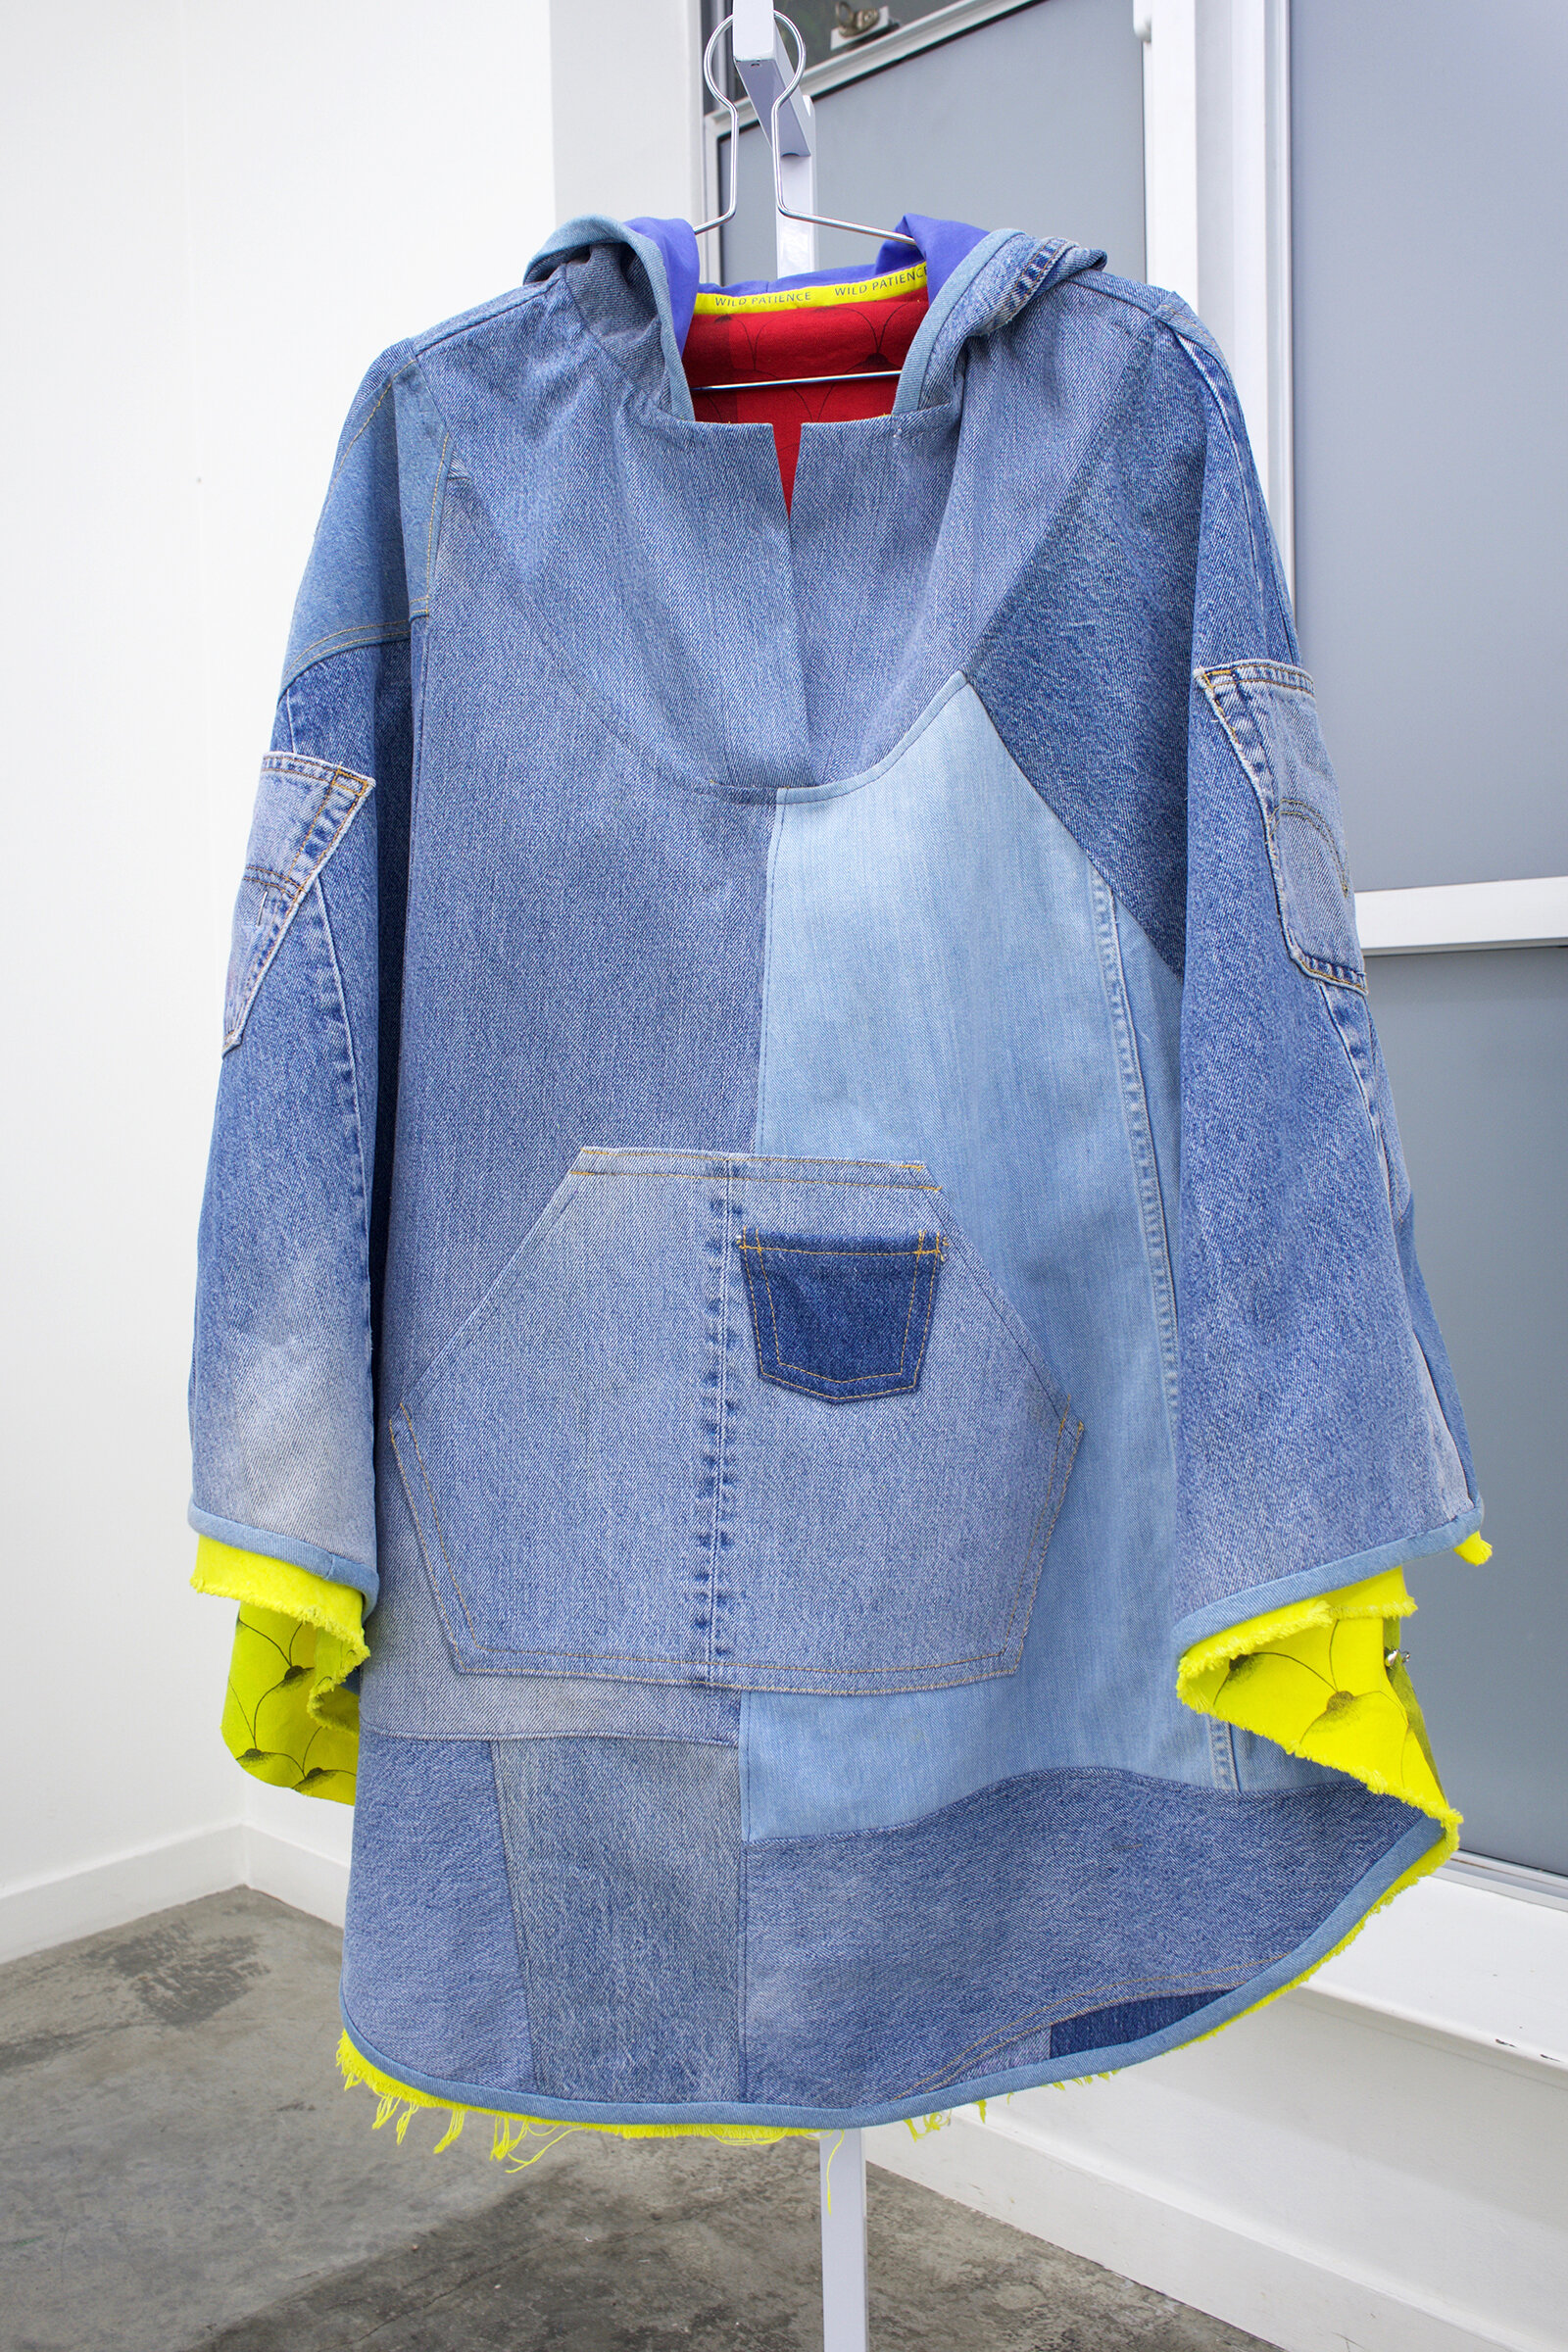  AMANDA CURRERI  Wild Patience Pocket Poncho,  2019 Recycled denim, screen printed cotton, synthetic dyed and digitally printed cotton, 33” x 43”    